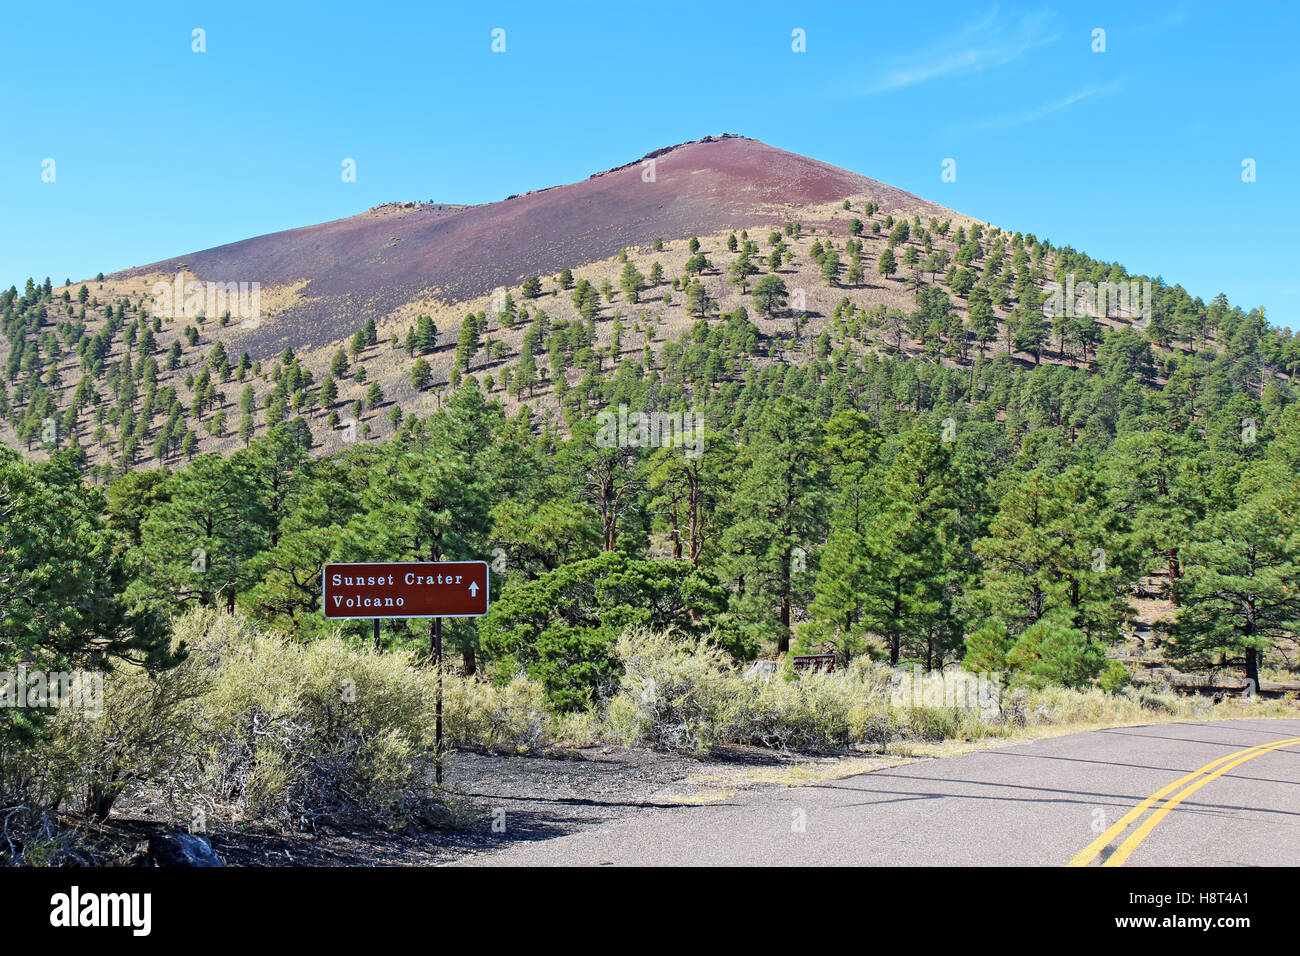 Sign and slope of the cinder cone at Sunset Crater Volcano National Monument north of Flagstaff, Arizona Stock Photo